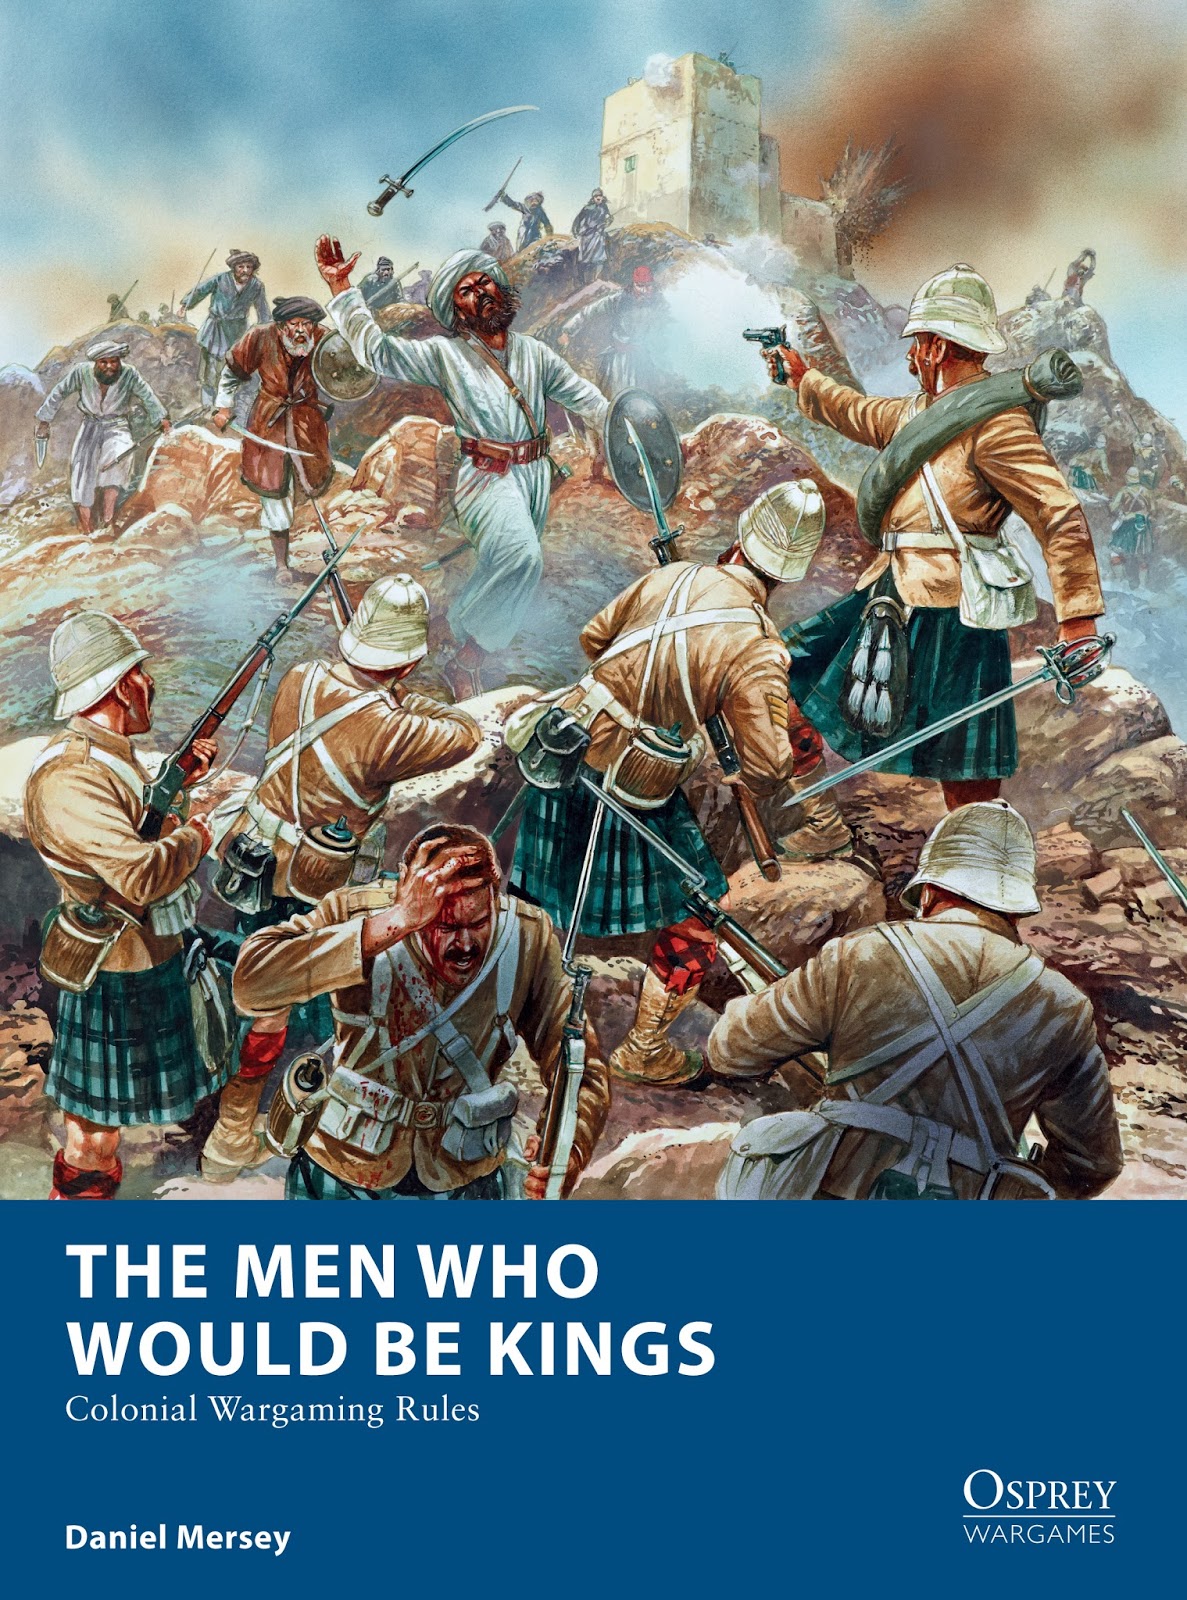 The Men Who Would Be Kings